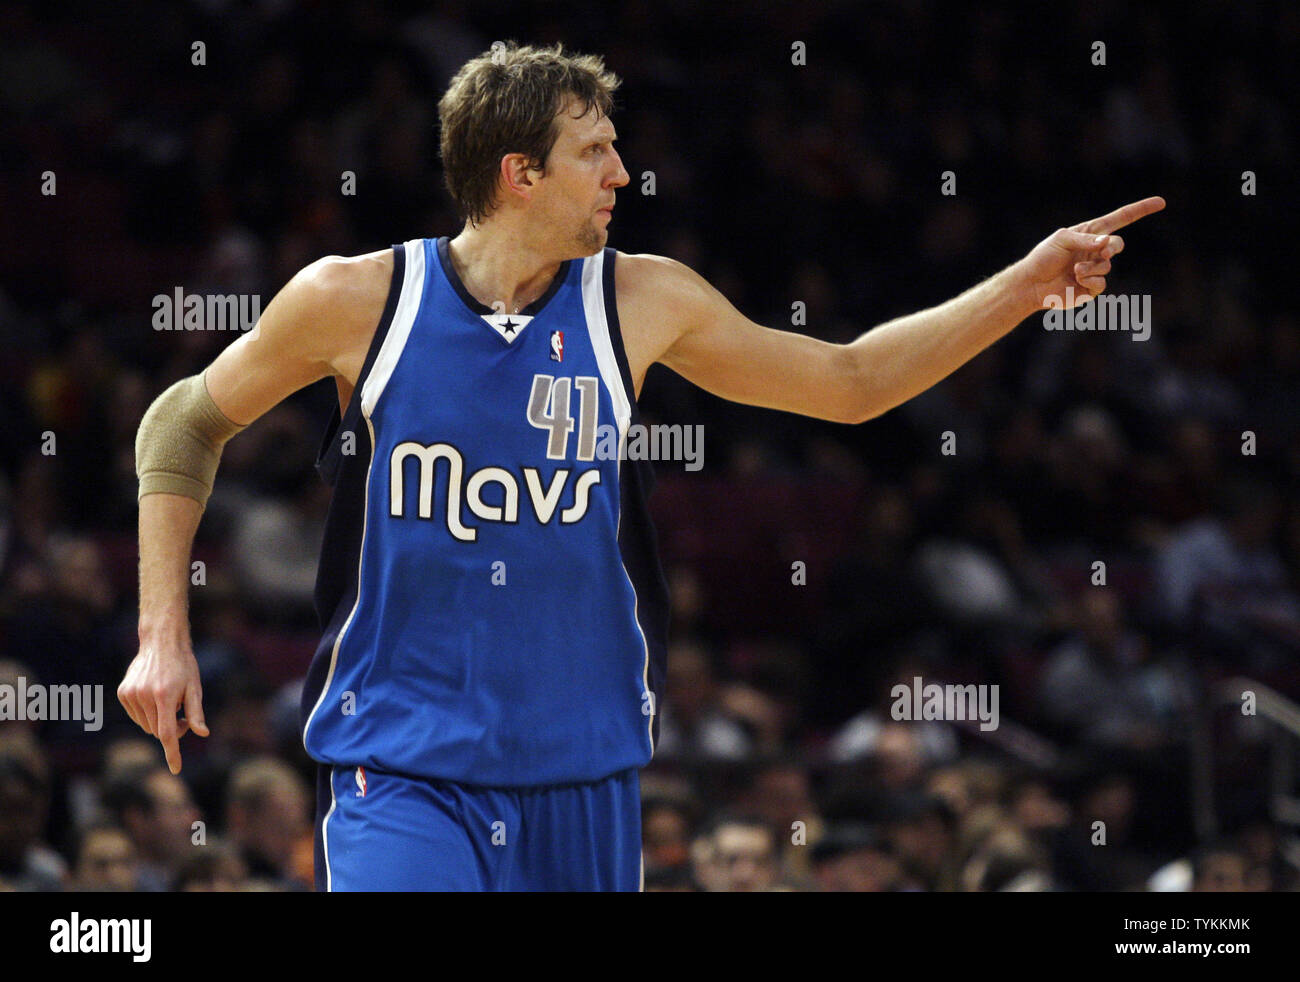 Dallas Mavericks Dirk Nowitzki points to a teammate after scoring 2 points in the third quarter against the New York Knicks at Madison Square Garden in New York City on January 24, 2010. The Mavericks defeated the Knicks by 50 points 128-78.    UPI/John Angelillo Stock Photo